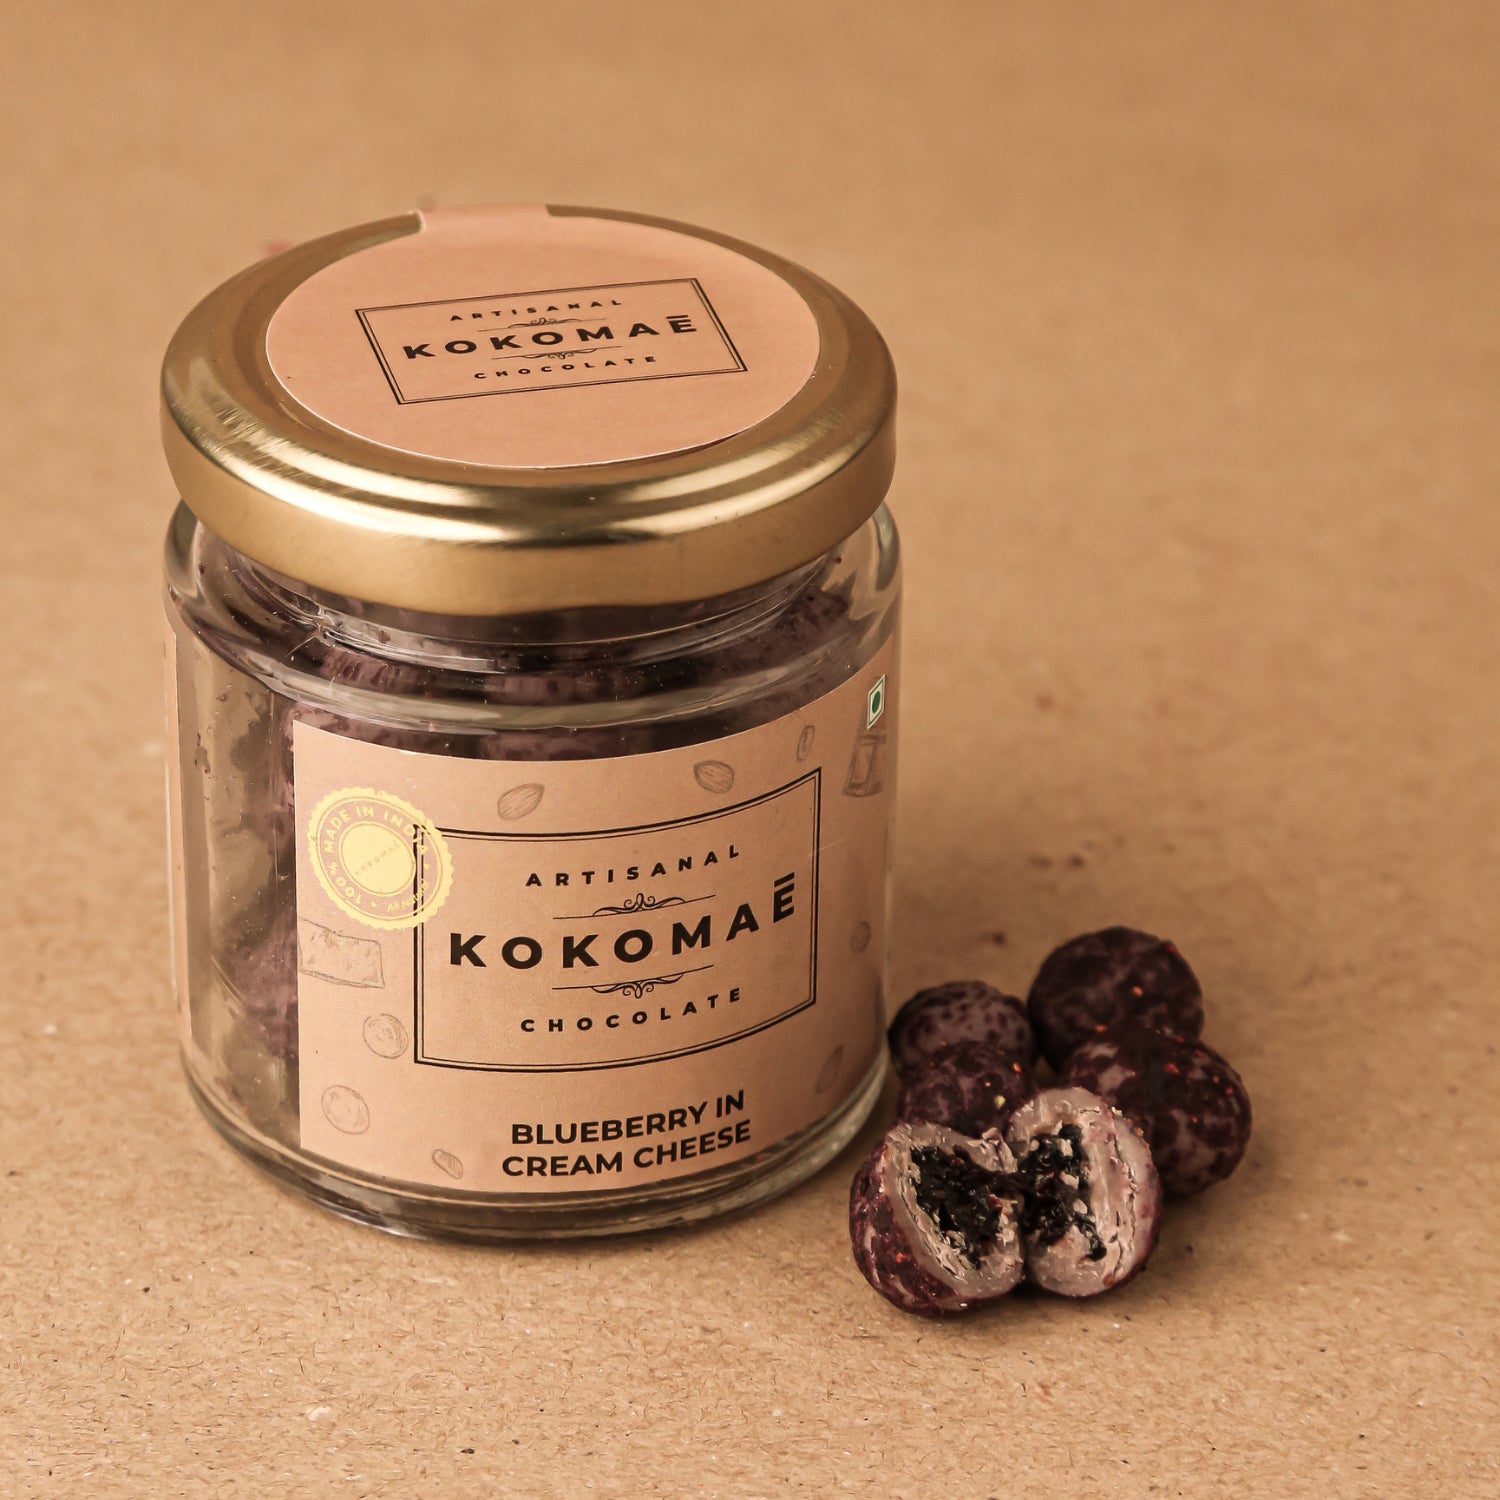 Kokomaē Blueberry Coated with Cream Cheese In Finest Couverture